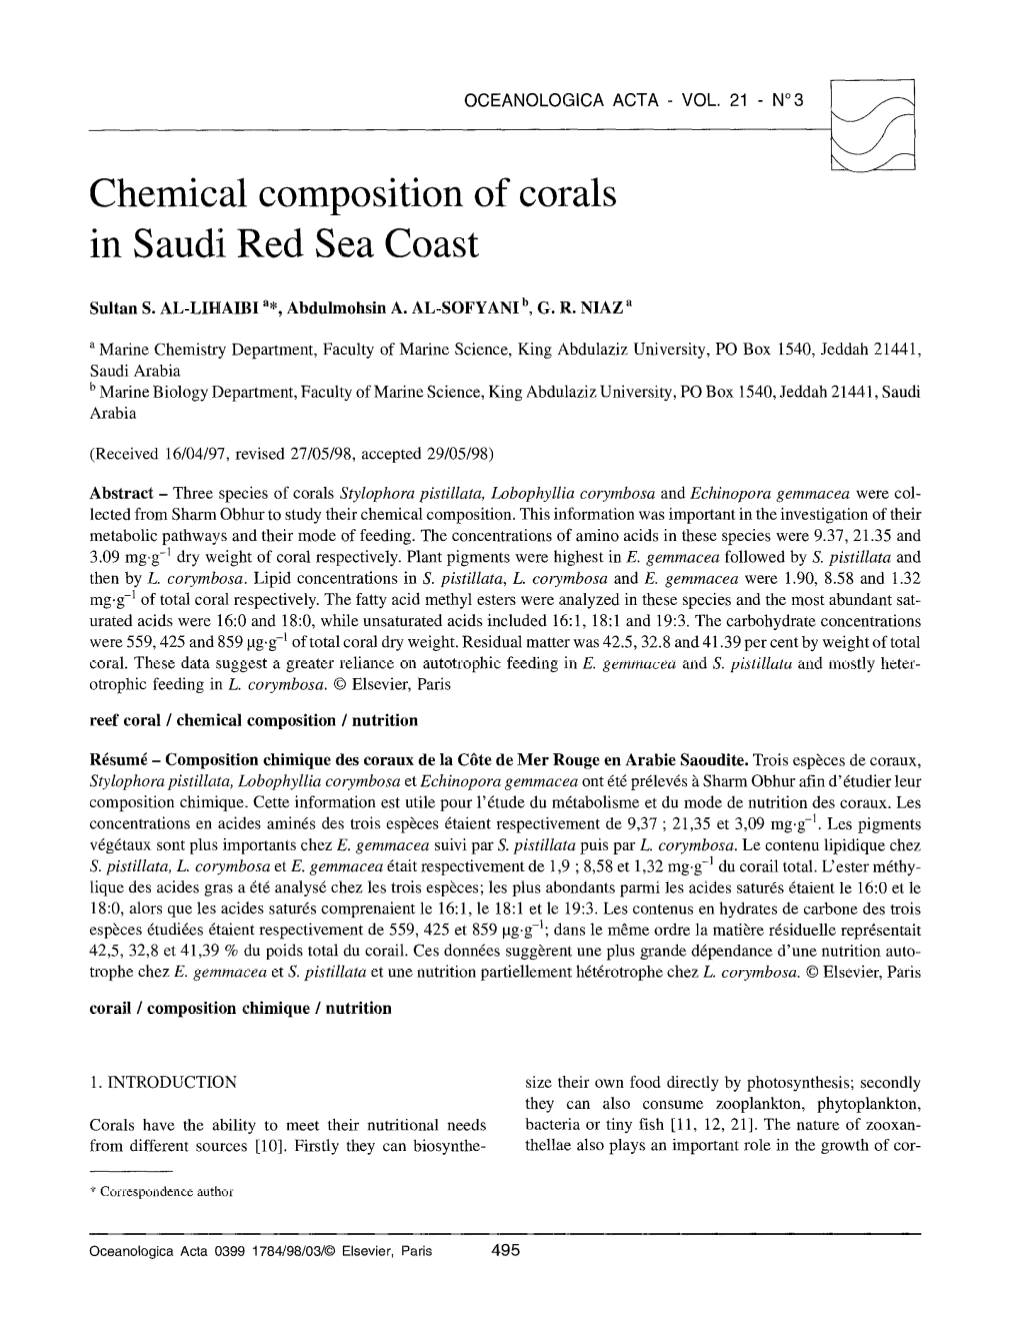 Chemical Composition of Corals in Saudi Red Sea Coast